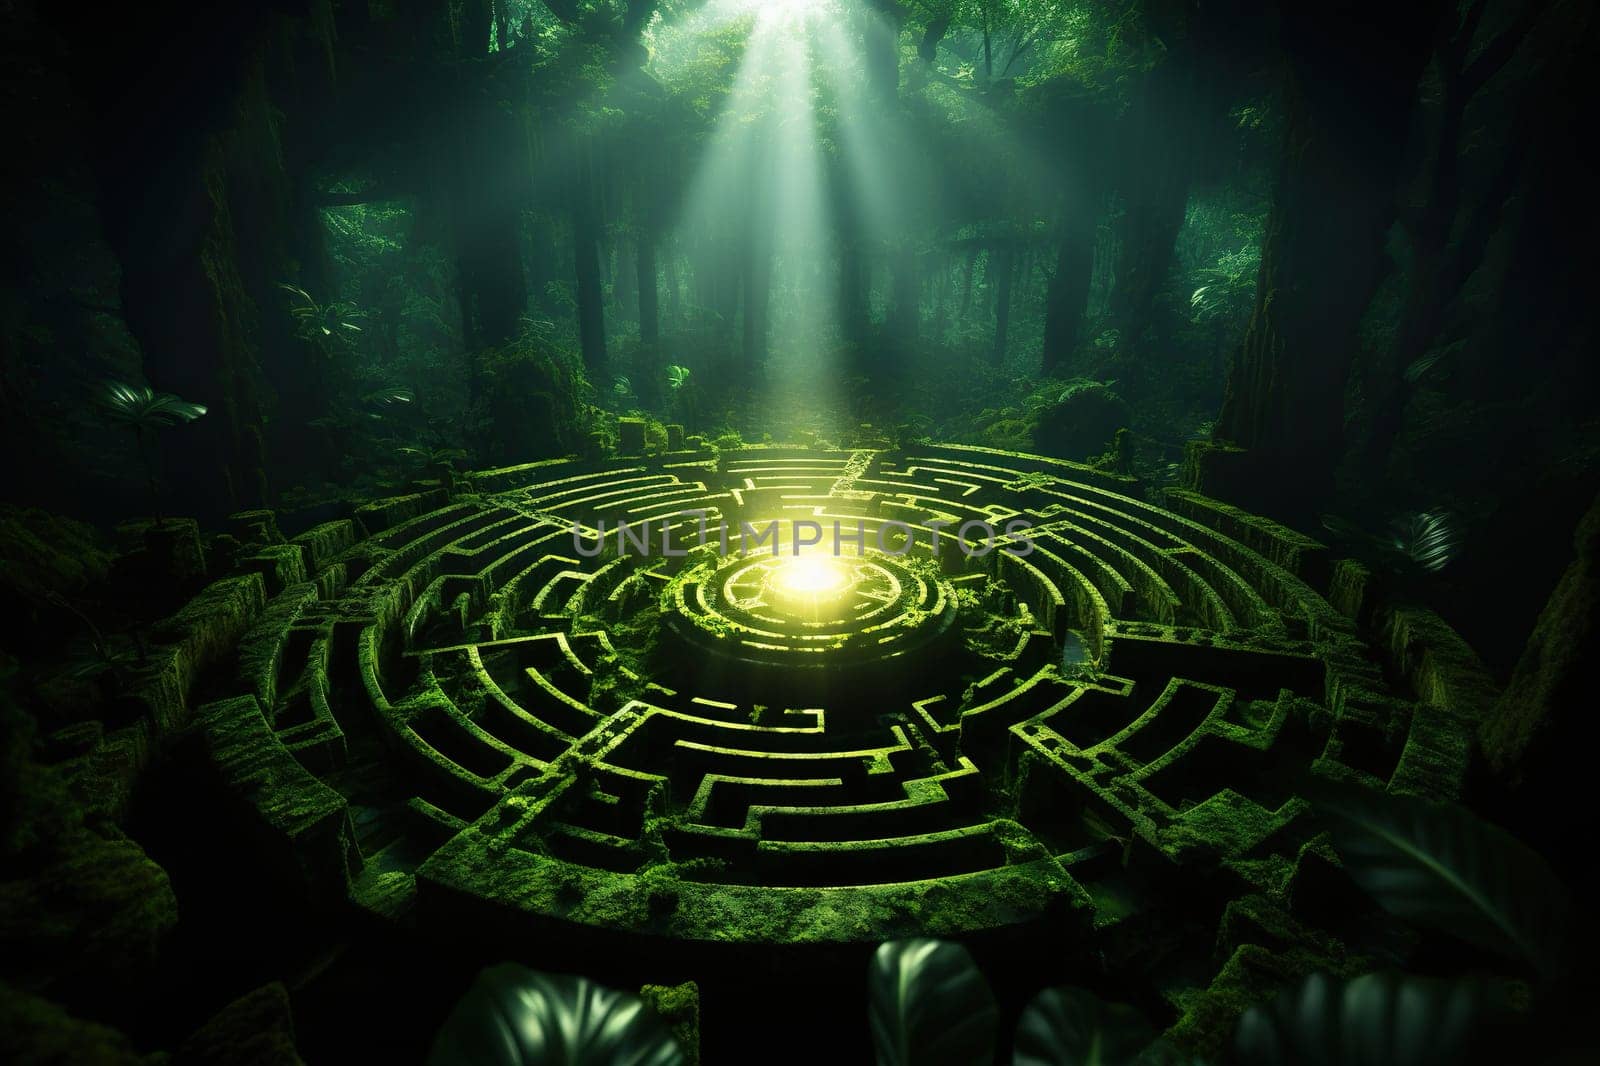 Green labyrinth with a light source in the center.